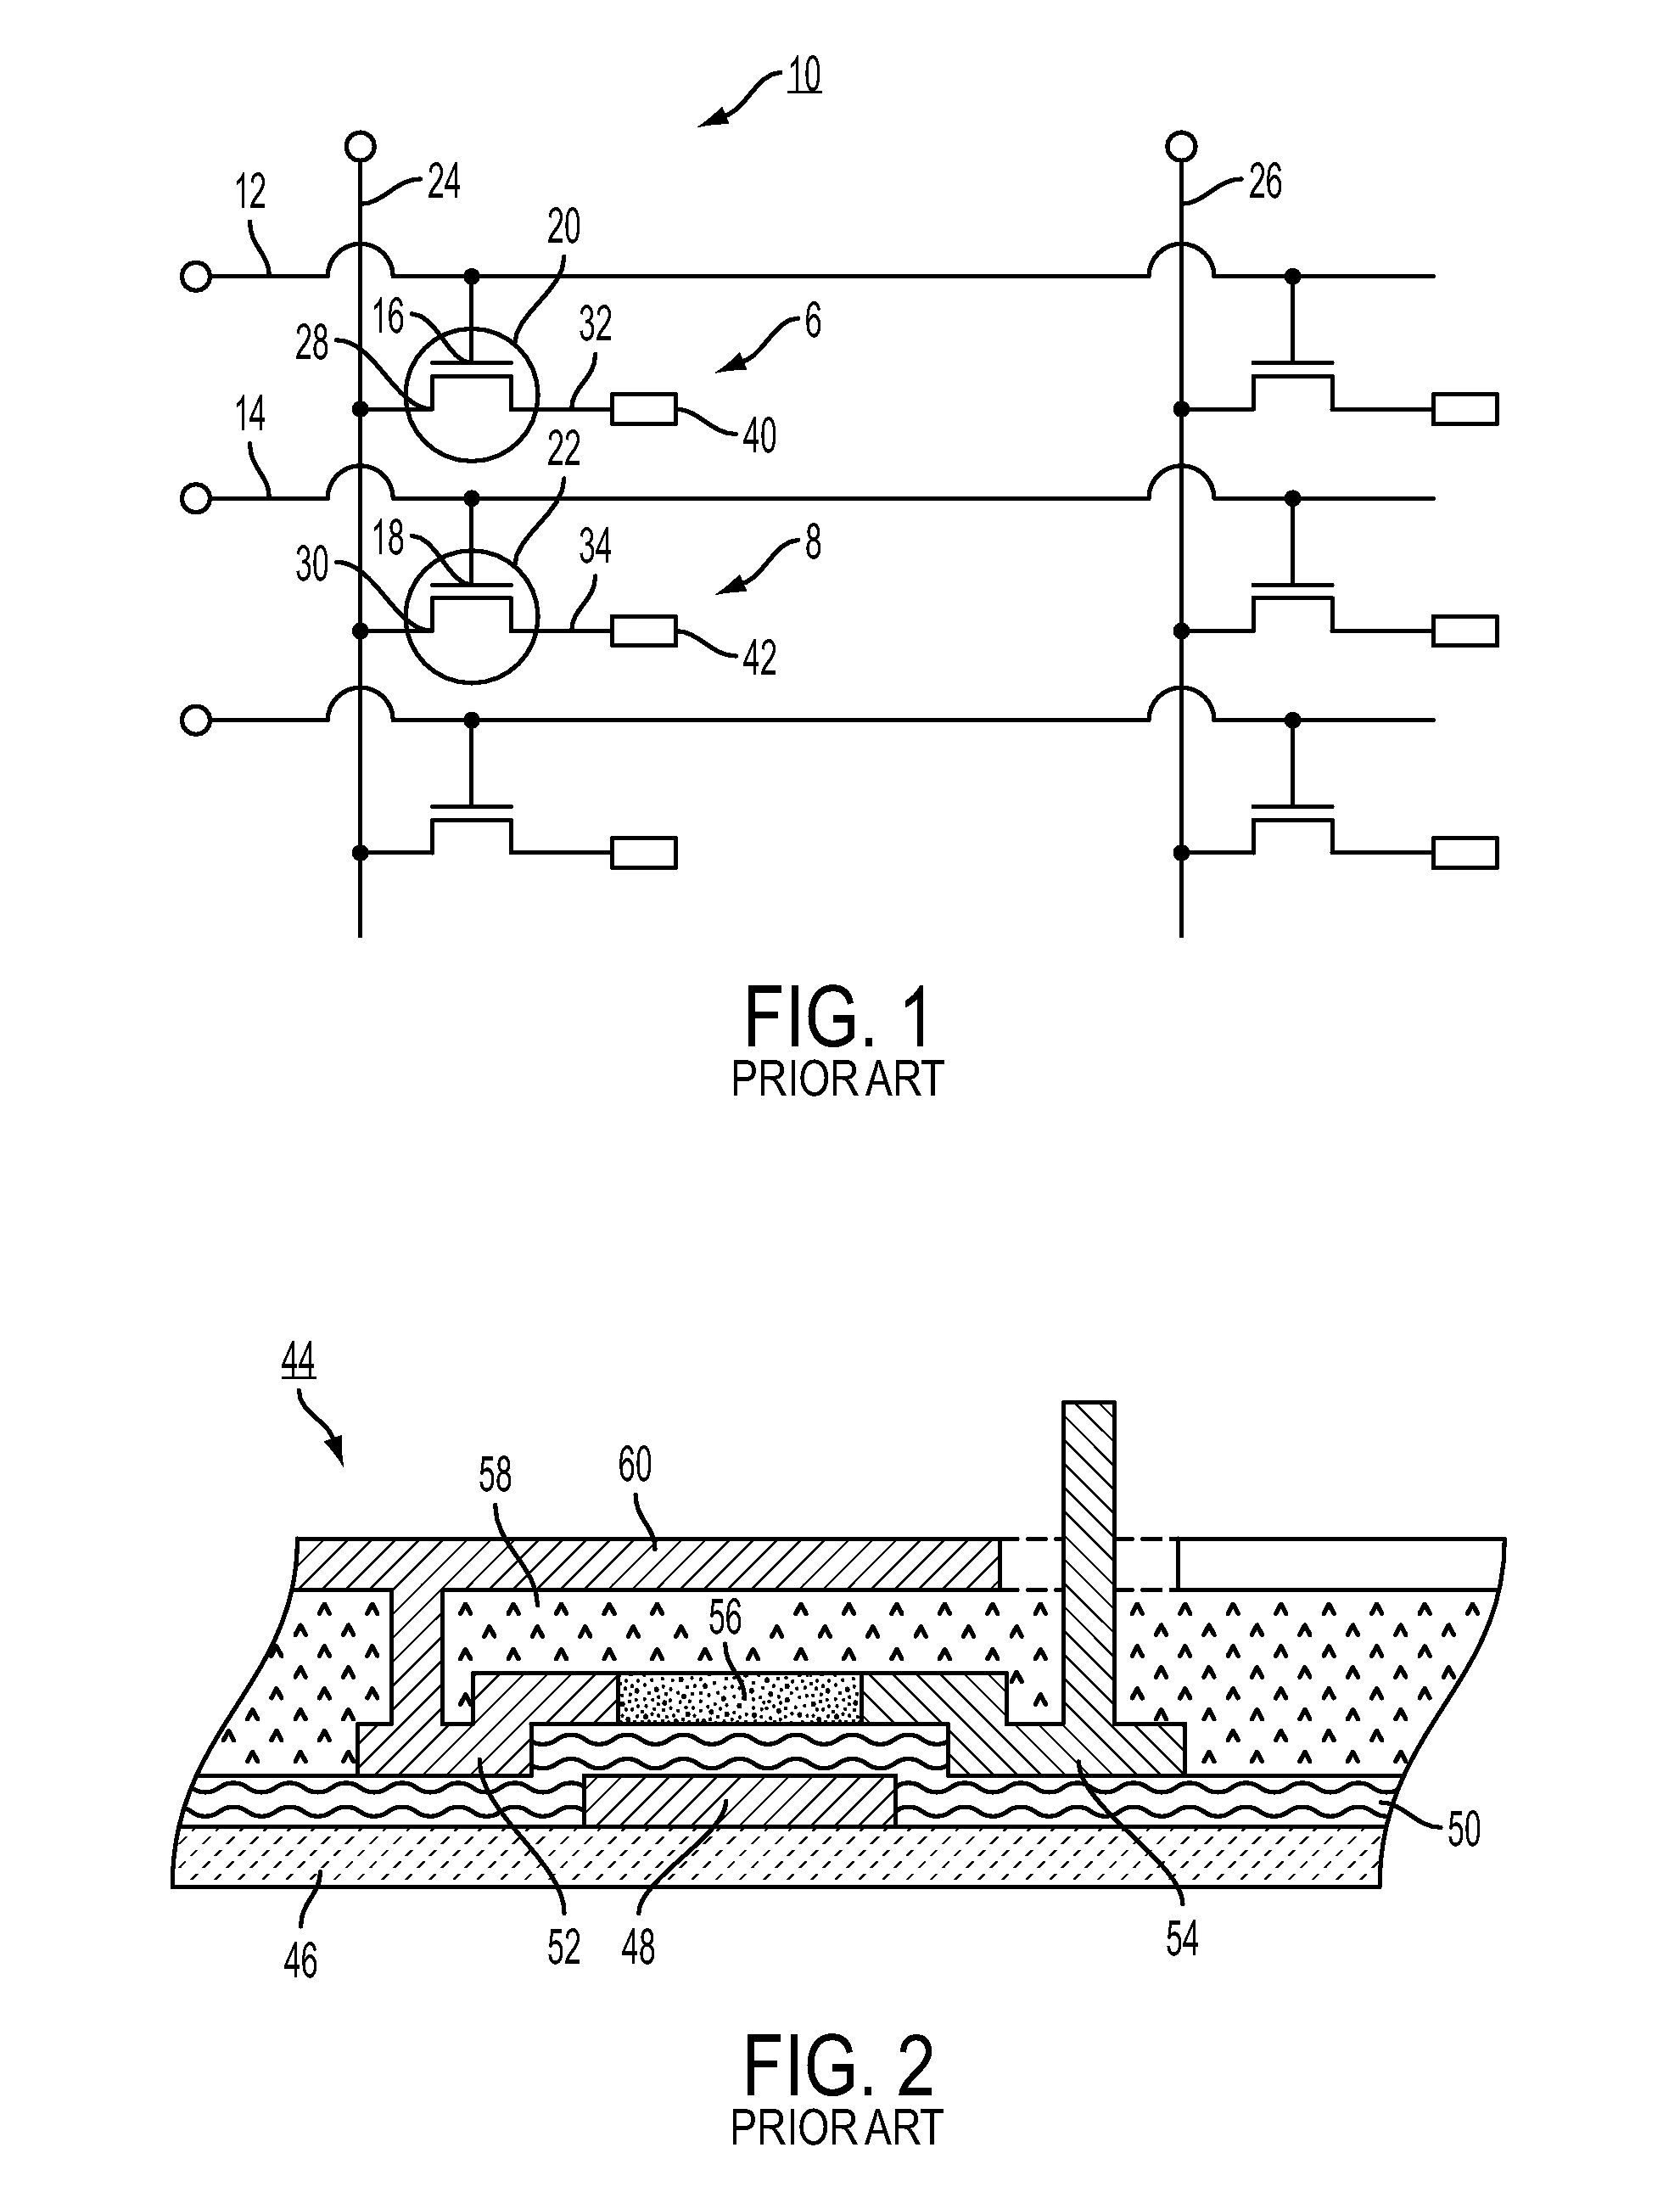 Transistor Device Formed on a Flexible Substrate Including Anodized Gate Dielectric